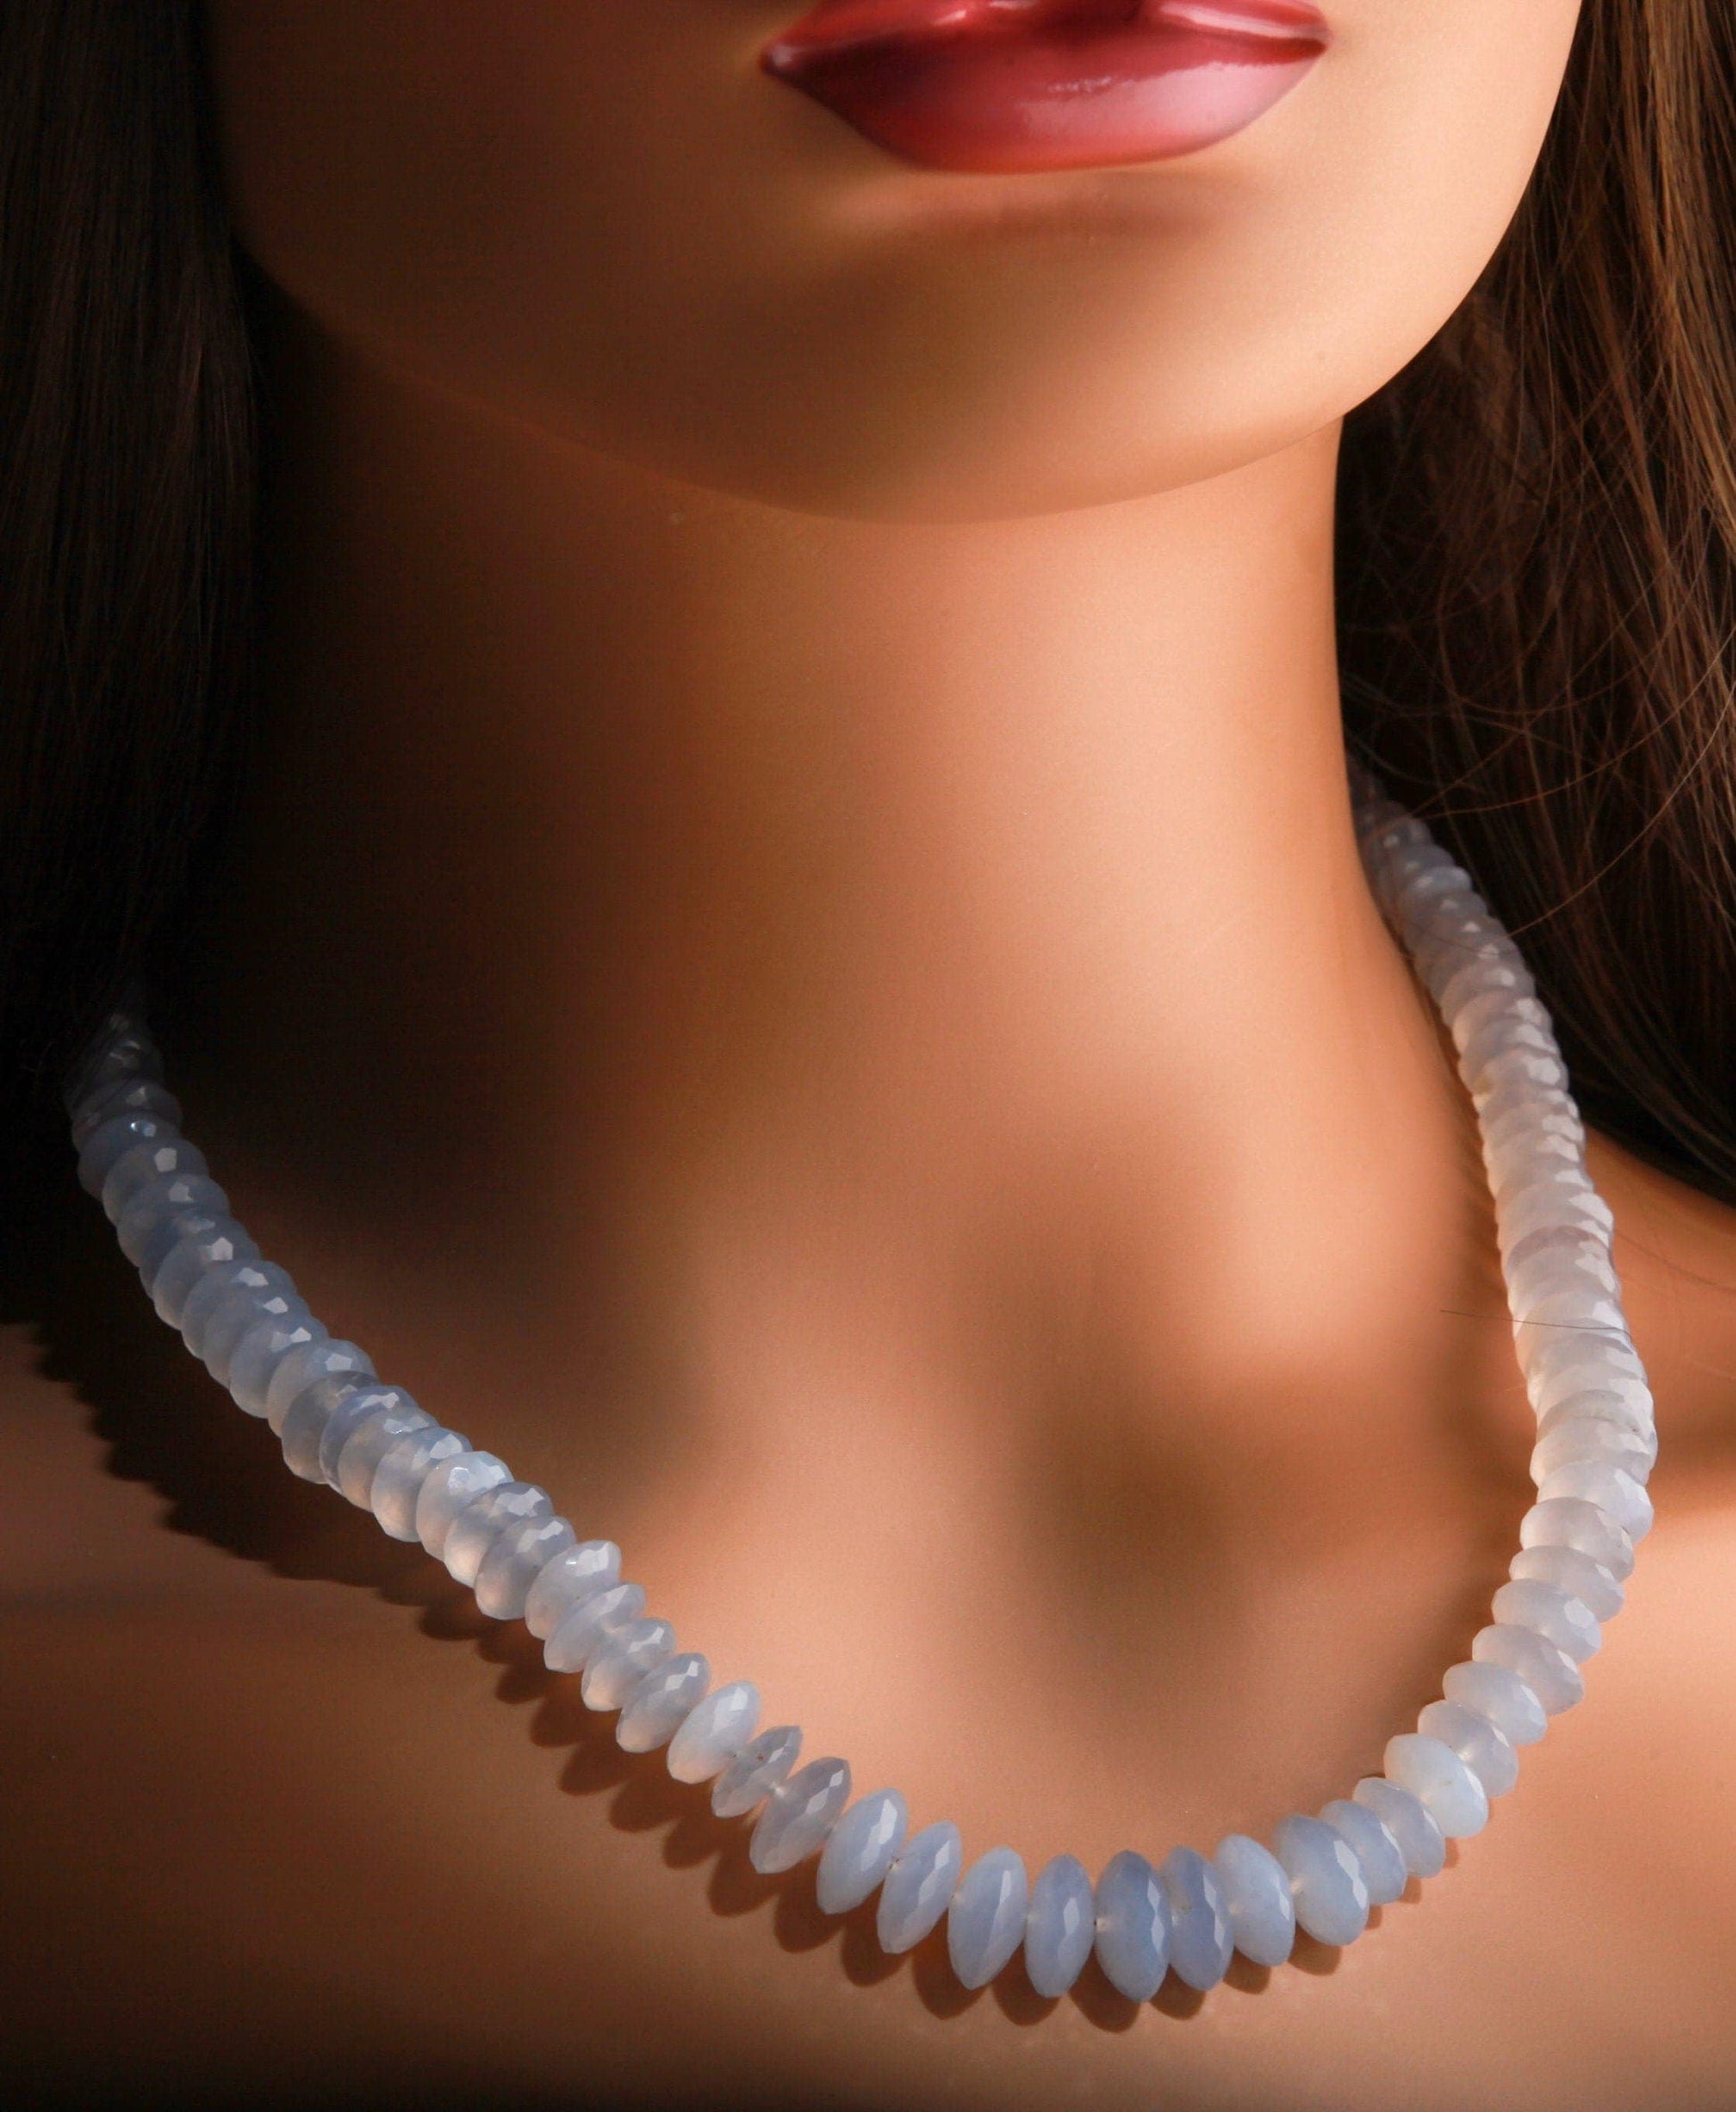 Natural Chalcedony sky blue AAA Quality German Cut Faceted Rondelle 7-12mm Graduated 17&quot; Necklace 2.5&quot; Extension Chain, precious gift.